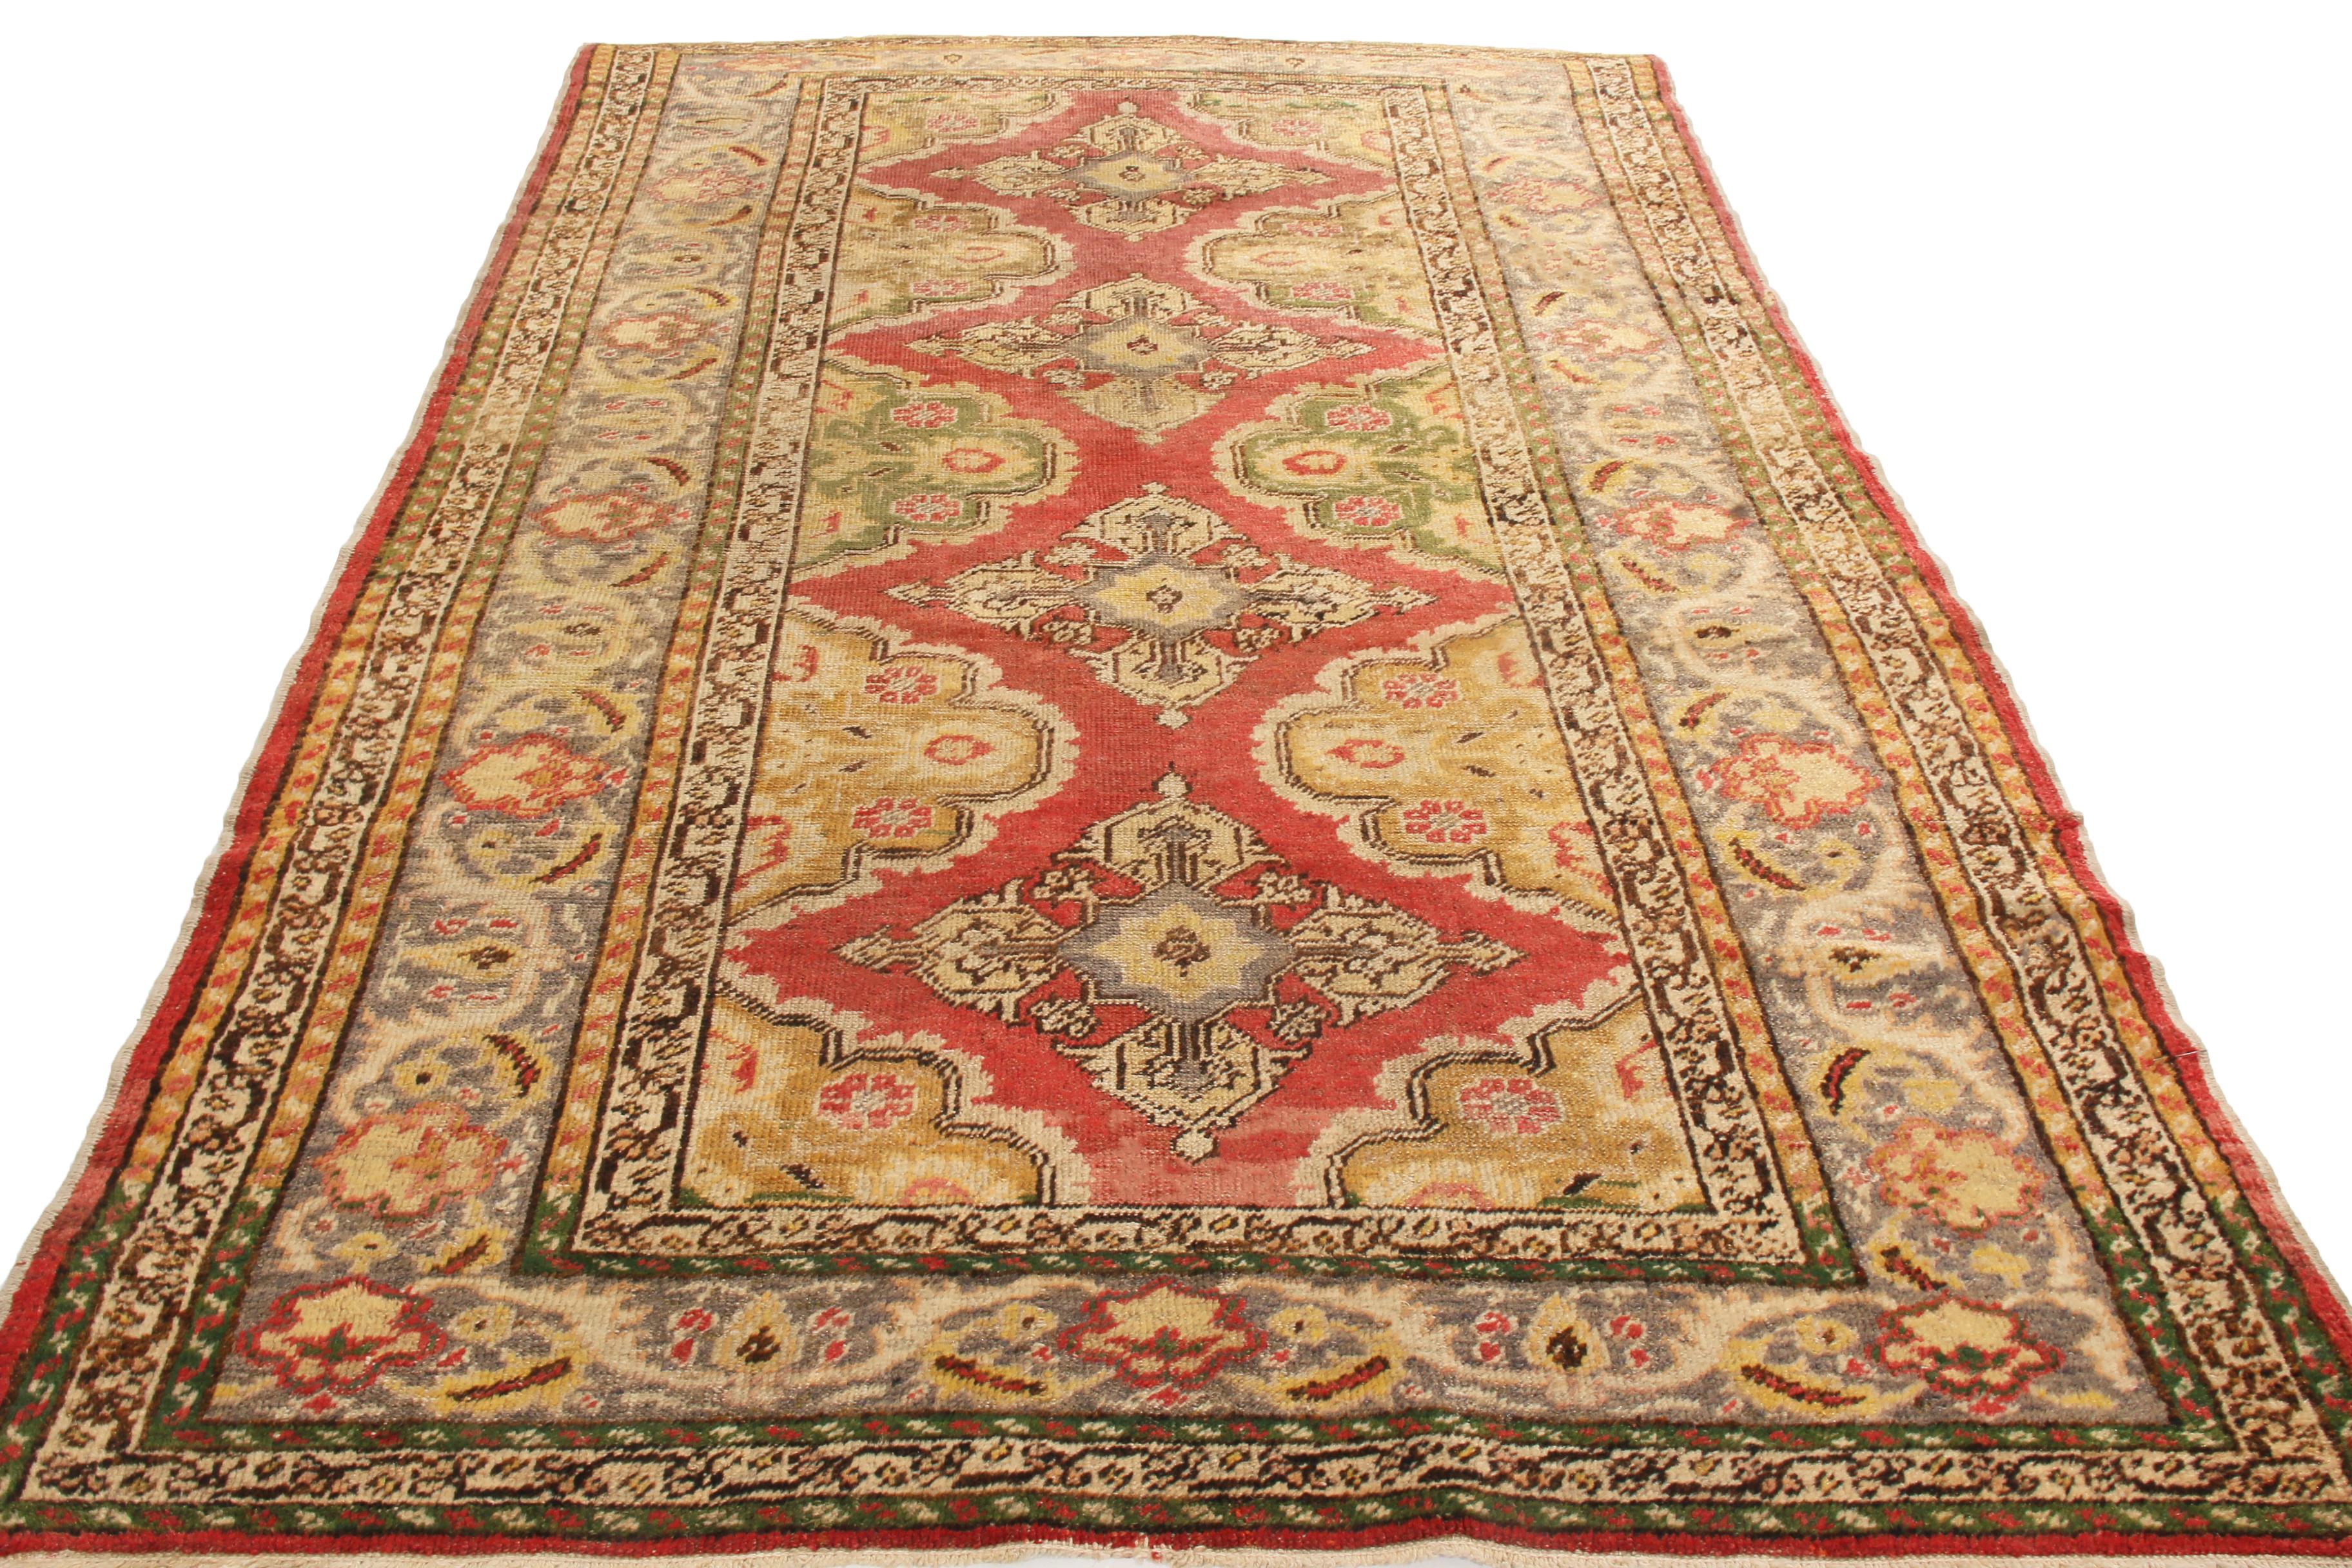 Originating from Turkey in 1910, this antique traditional Kayseri rug has a unique colorway orientation to complement its universal symmetry. Hand knotted in high-quality wool, the red background of the field elevates four repetitious but very